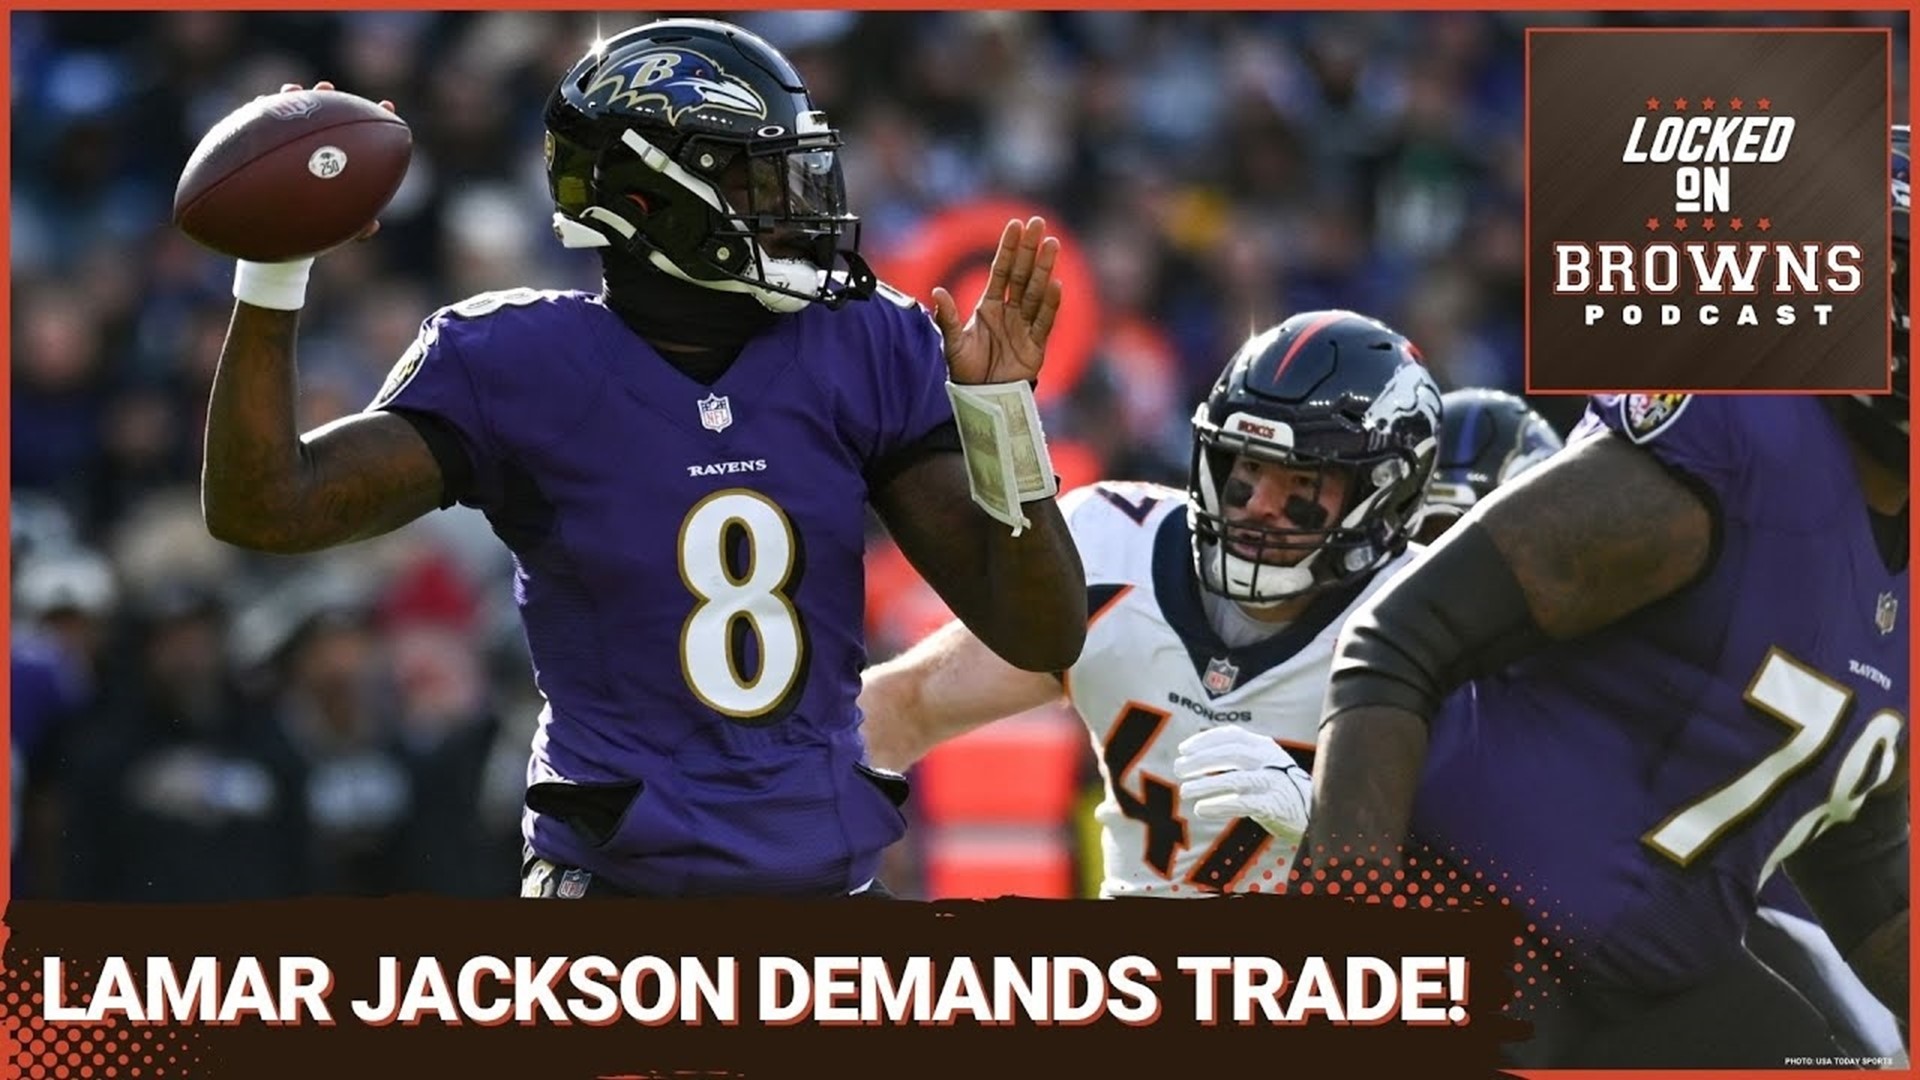 In this video, we're going to show you how the Browns crushed Lamar Jackson and the Ravens WITHOUT even stepping on the field!